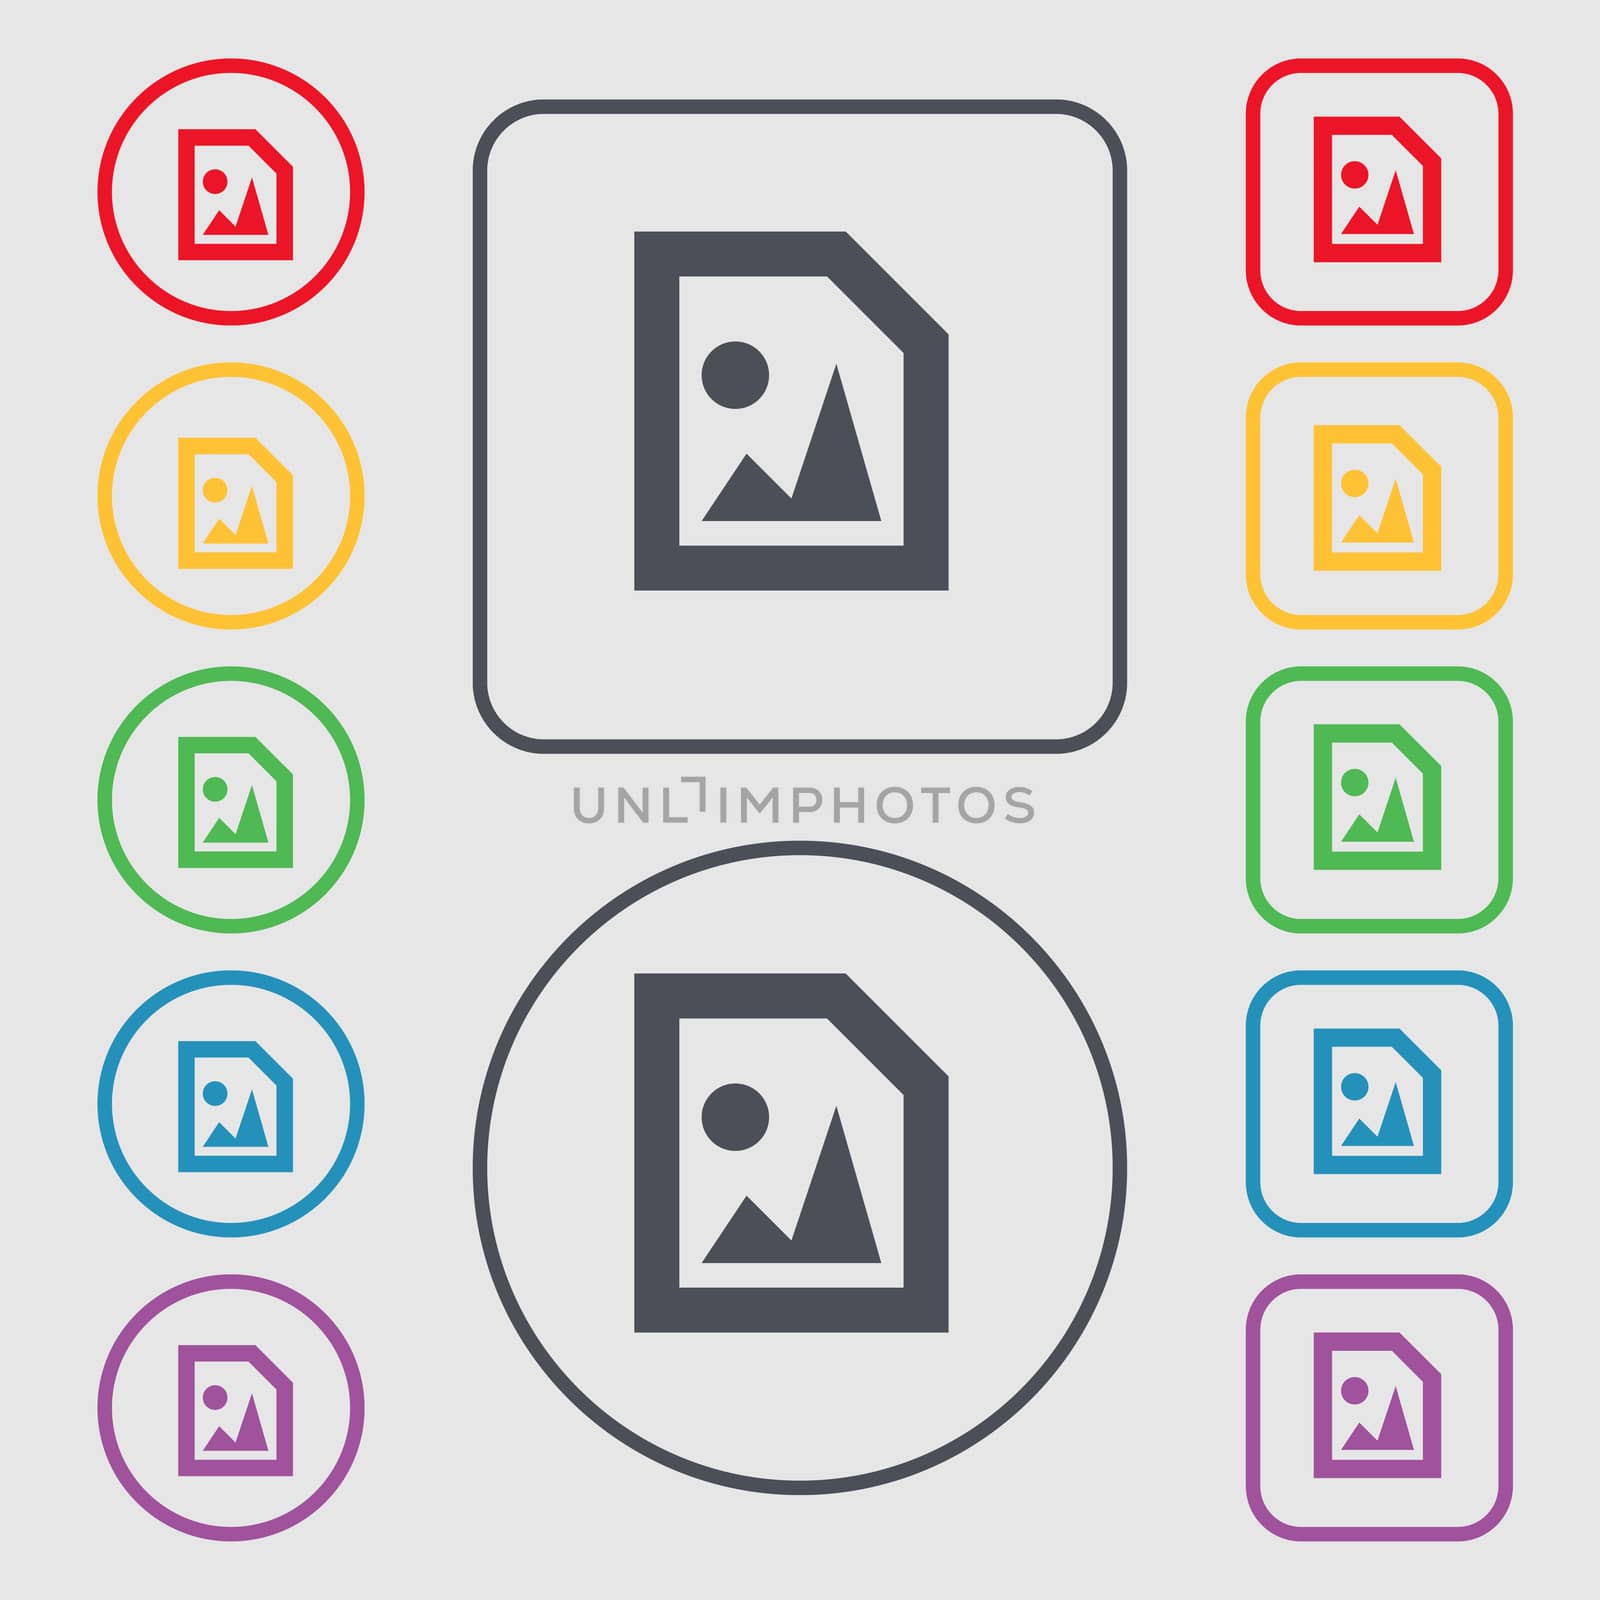 File JPG icon sign. symbol on the Round and square buttons with frame. illustration